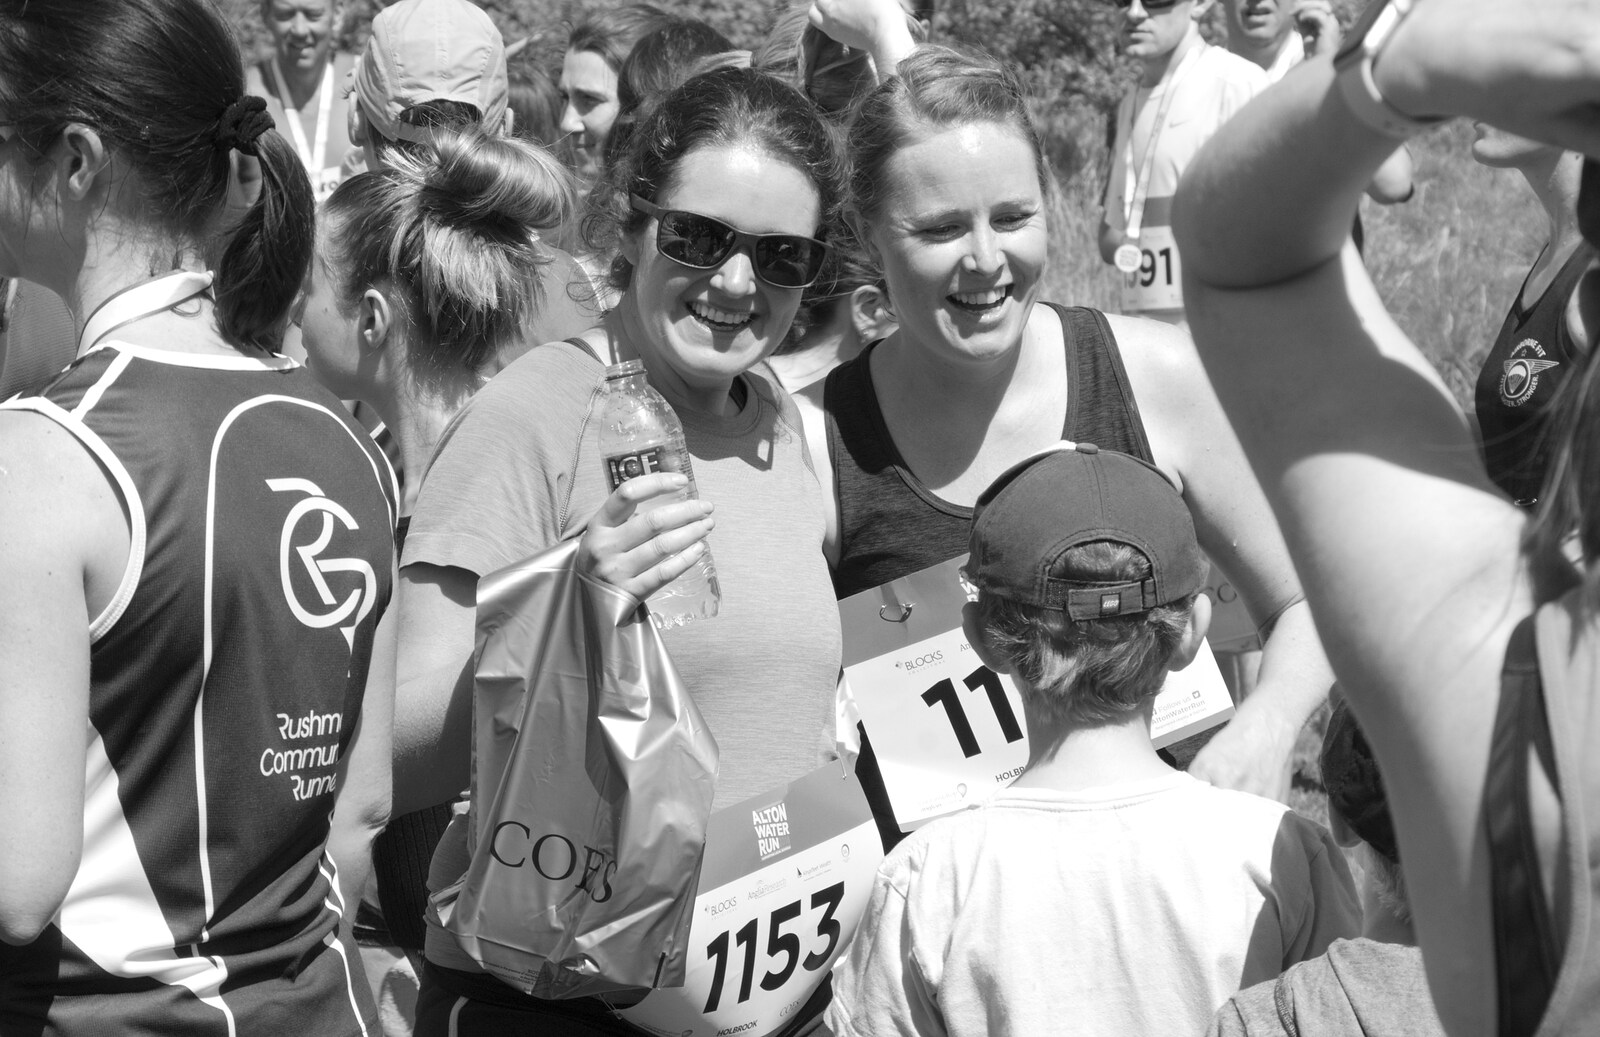 Isobel meets up with Allyson from Isobel's 10km Run, Alton Water, Stutton, Suffolk - 6th May 2018